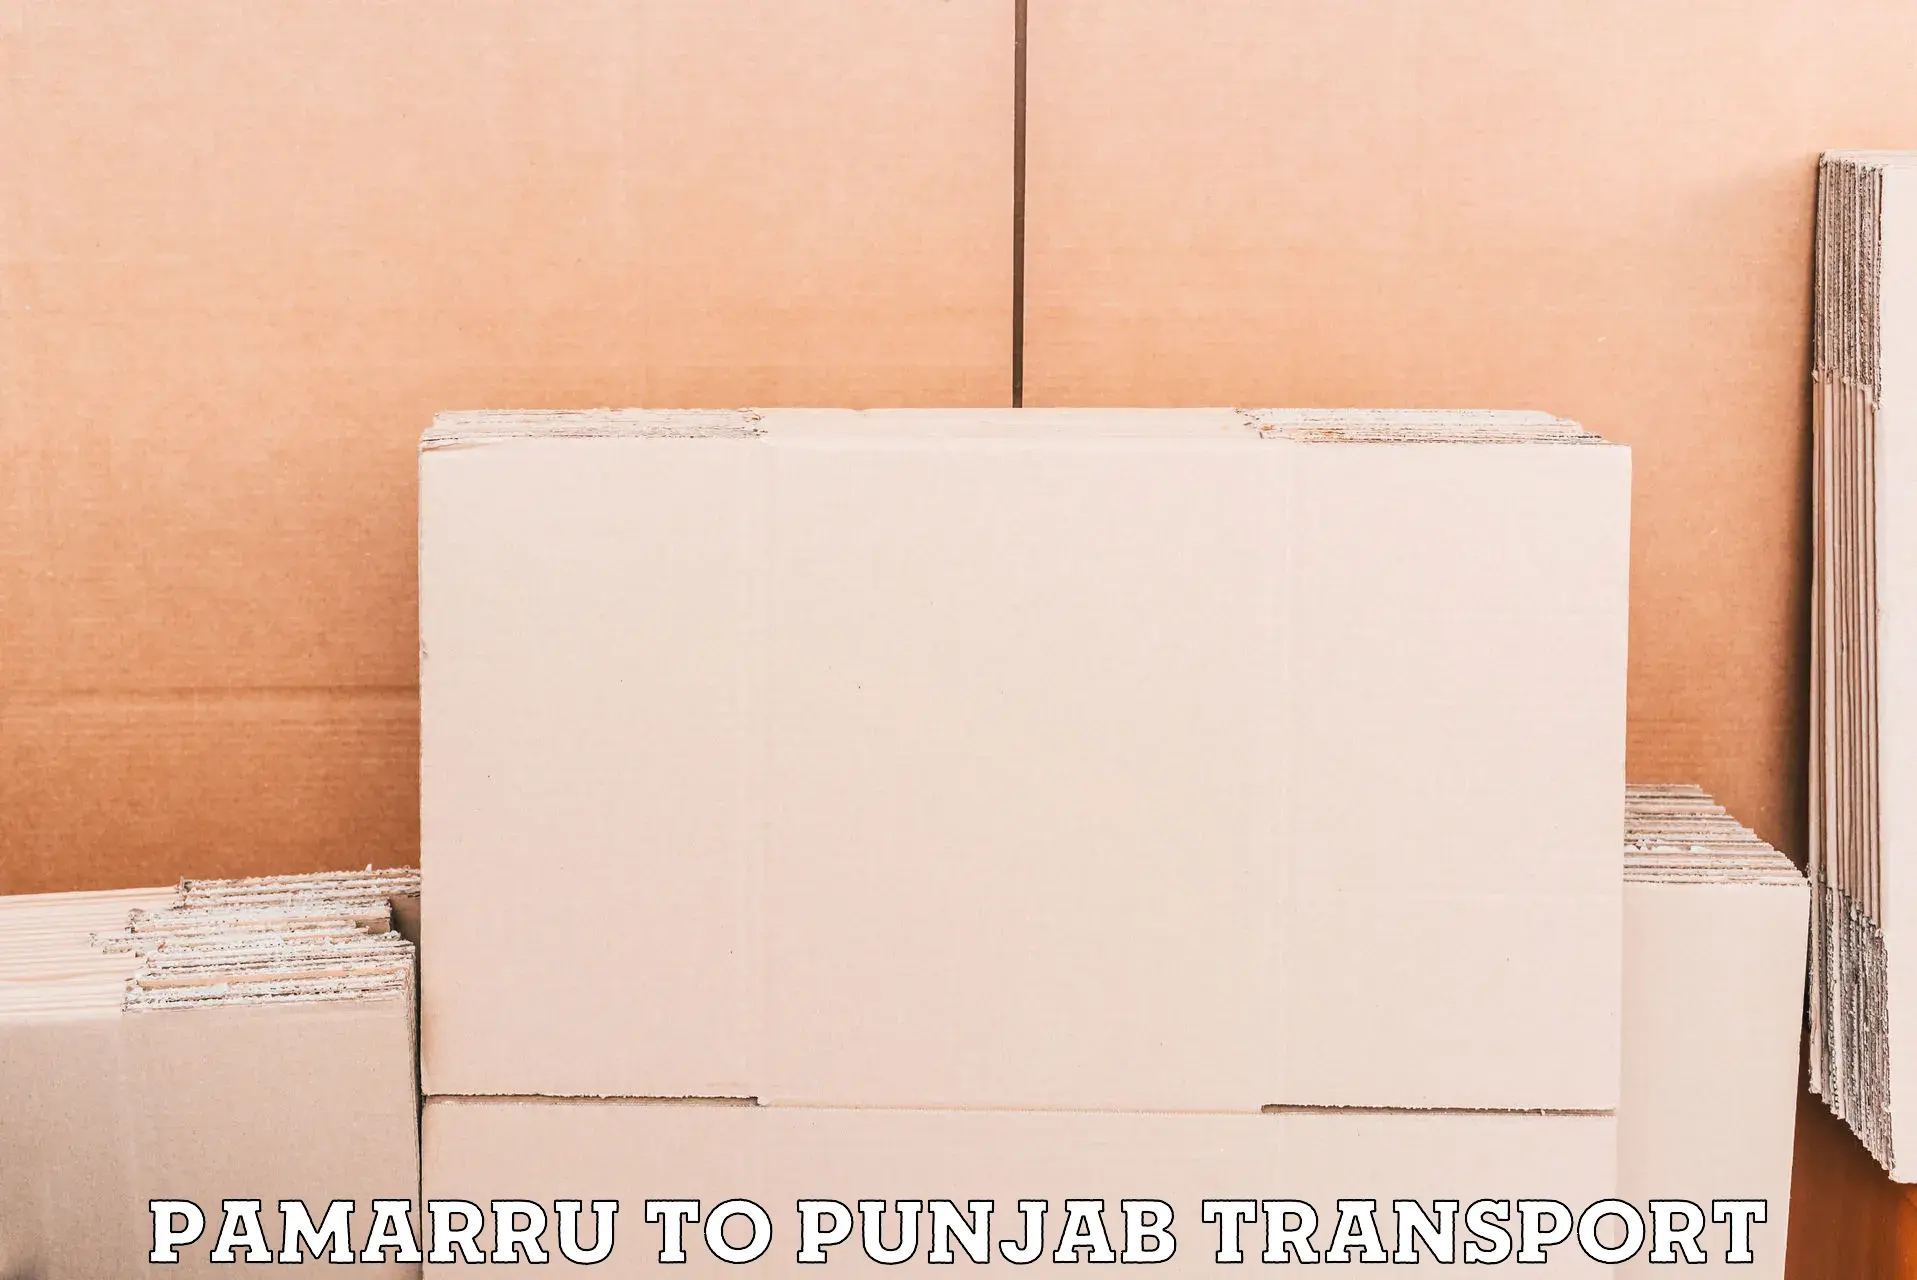 Container transport service Pamarru to Patiala